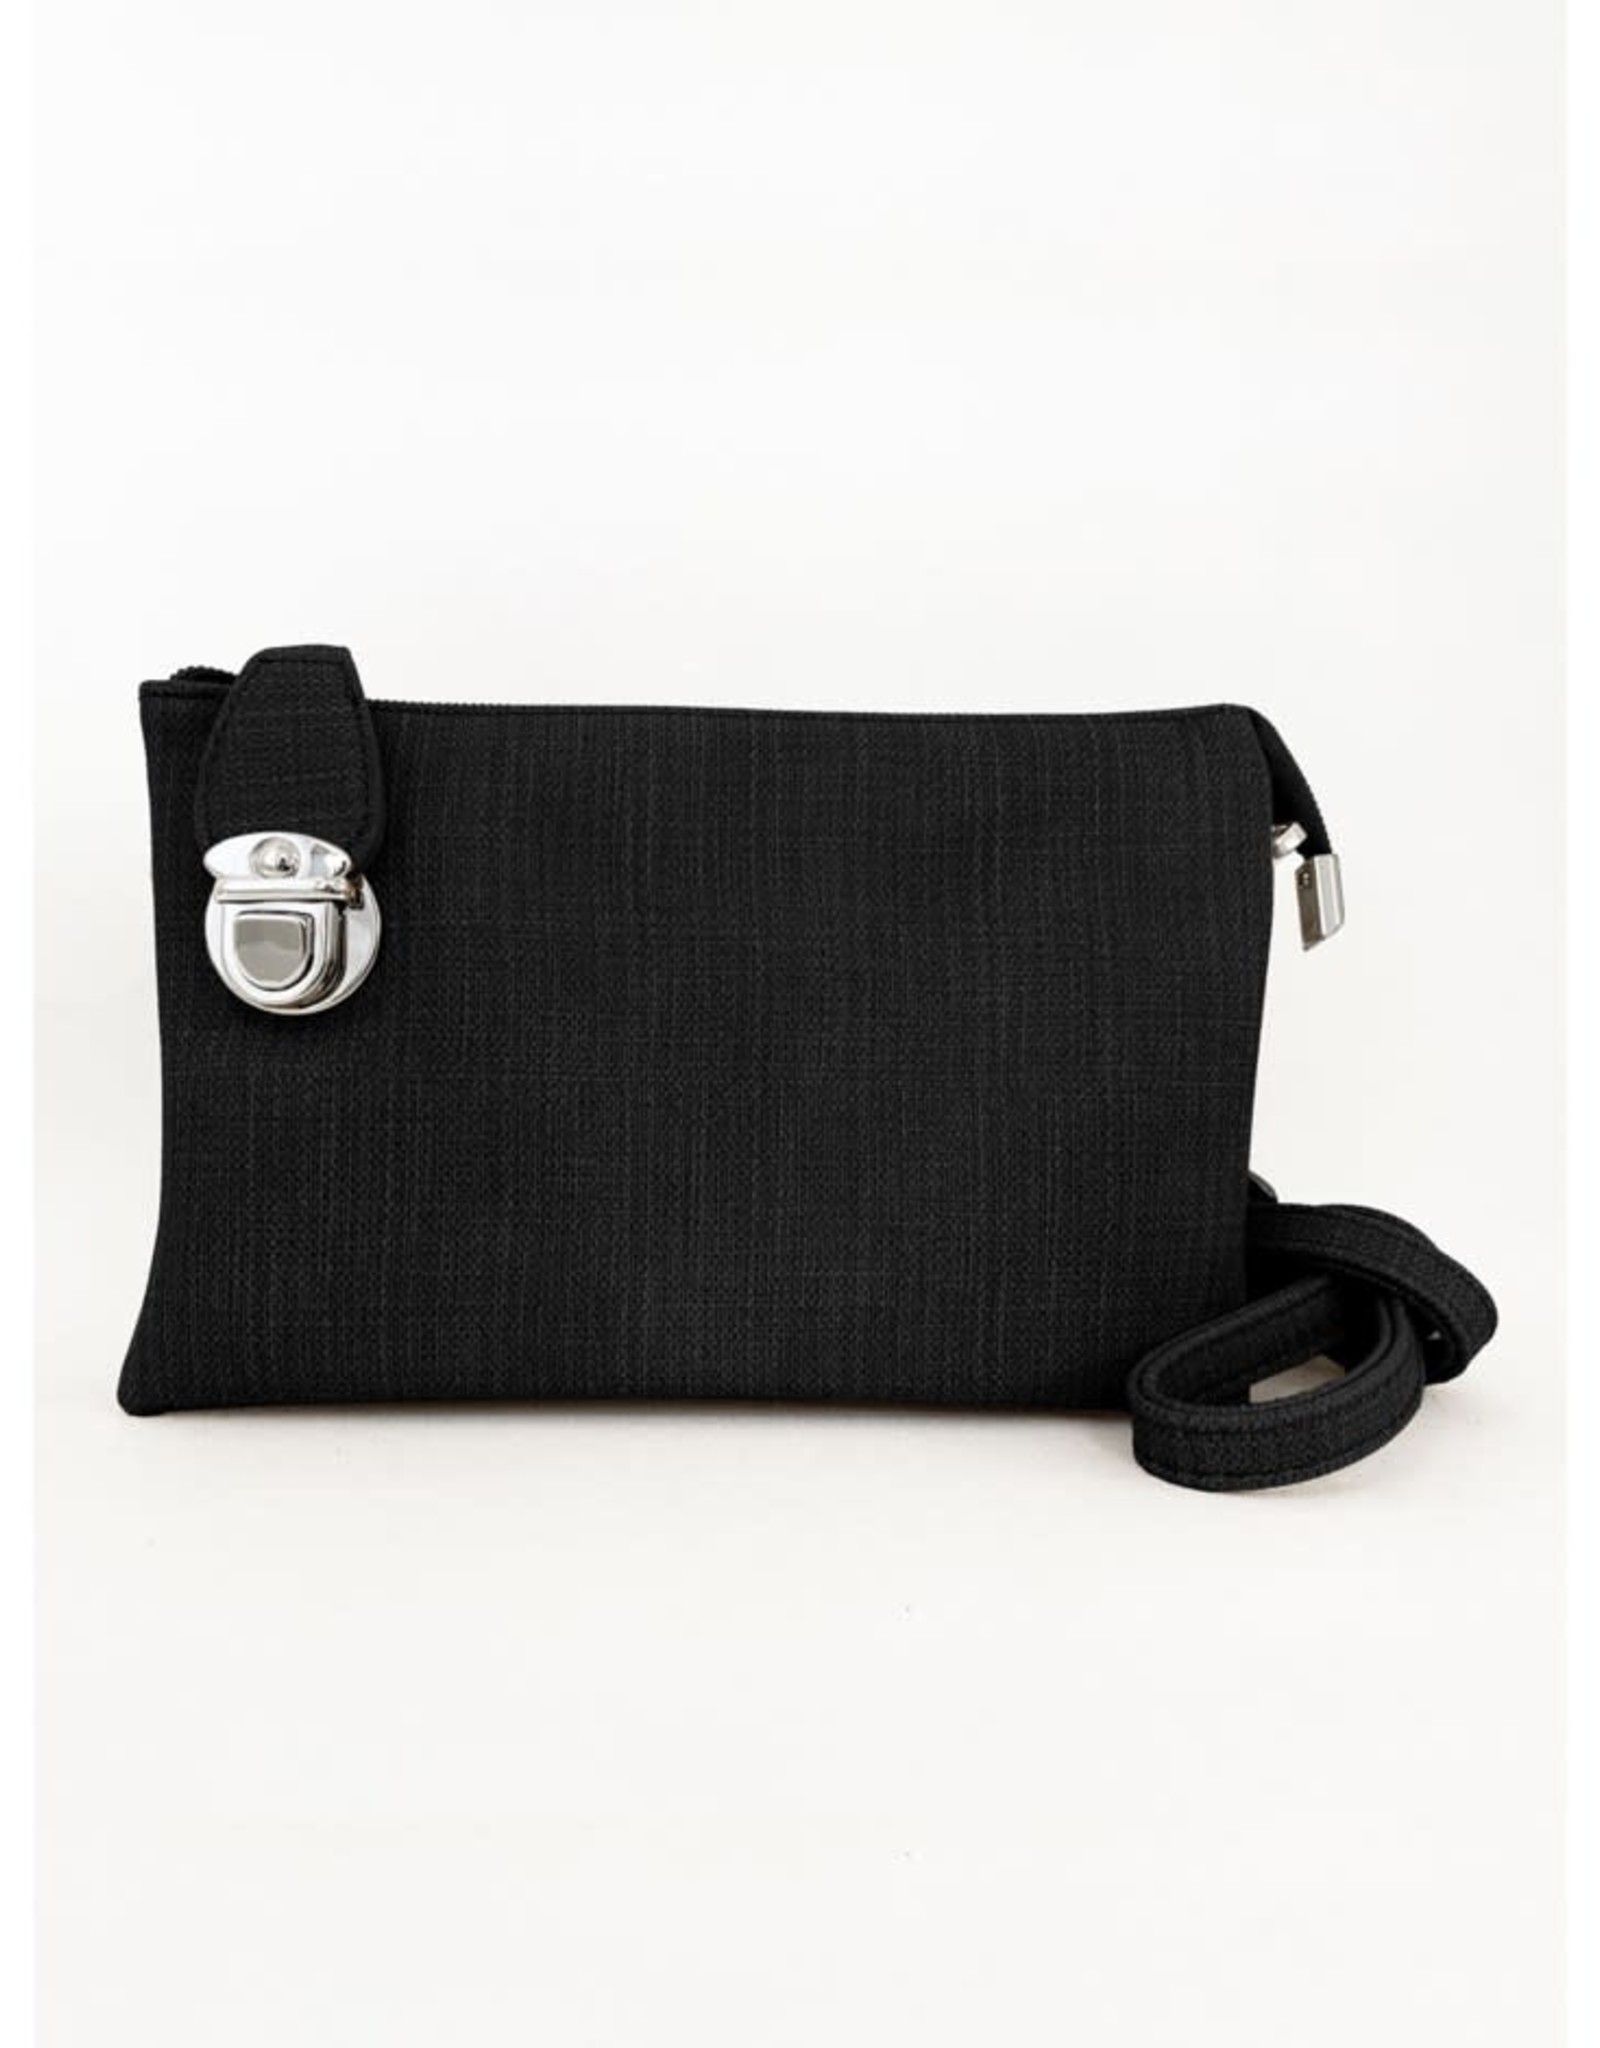 Caracol Crossbody Bag with with pockets 7011